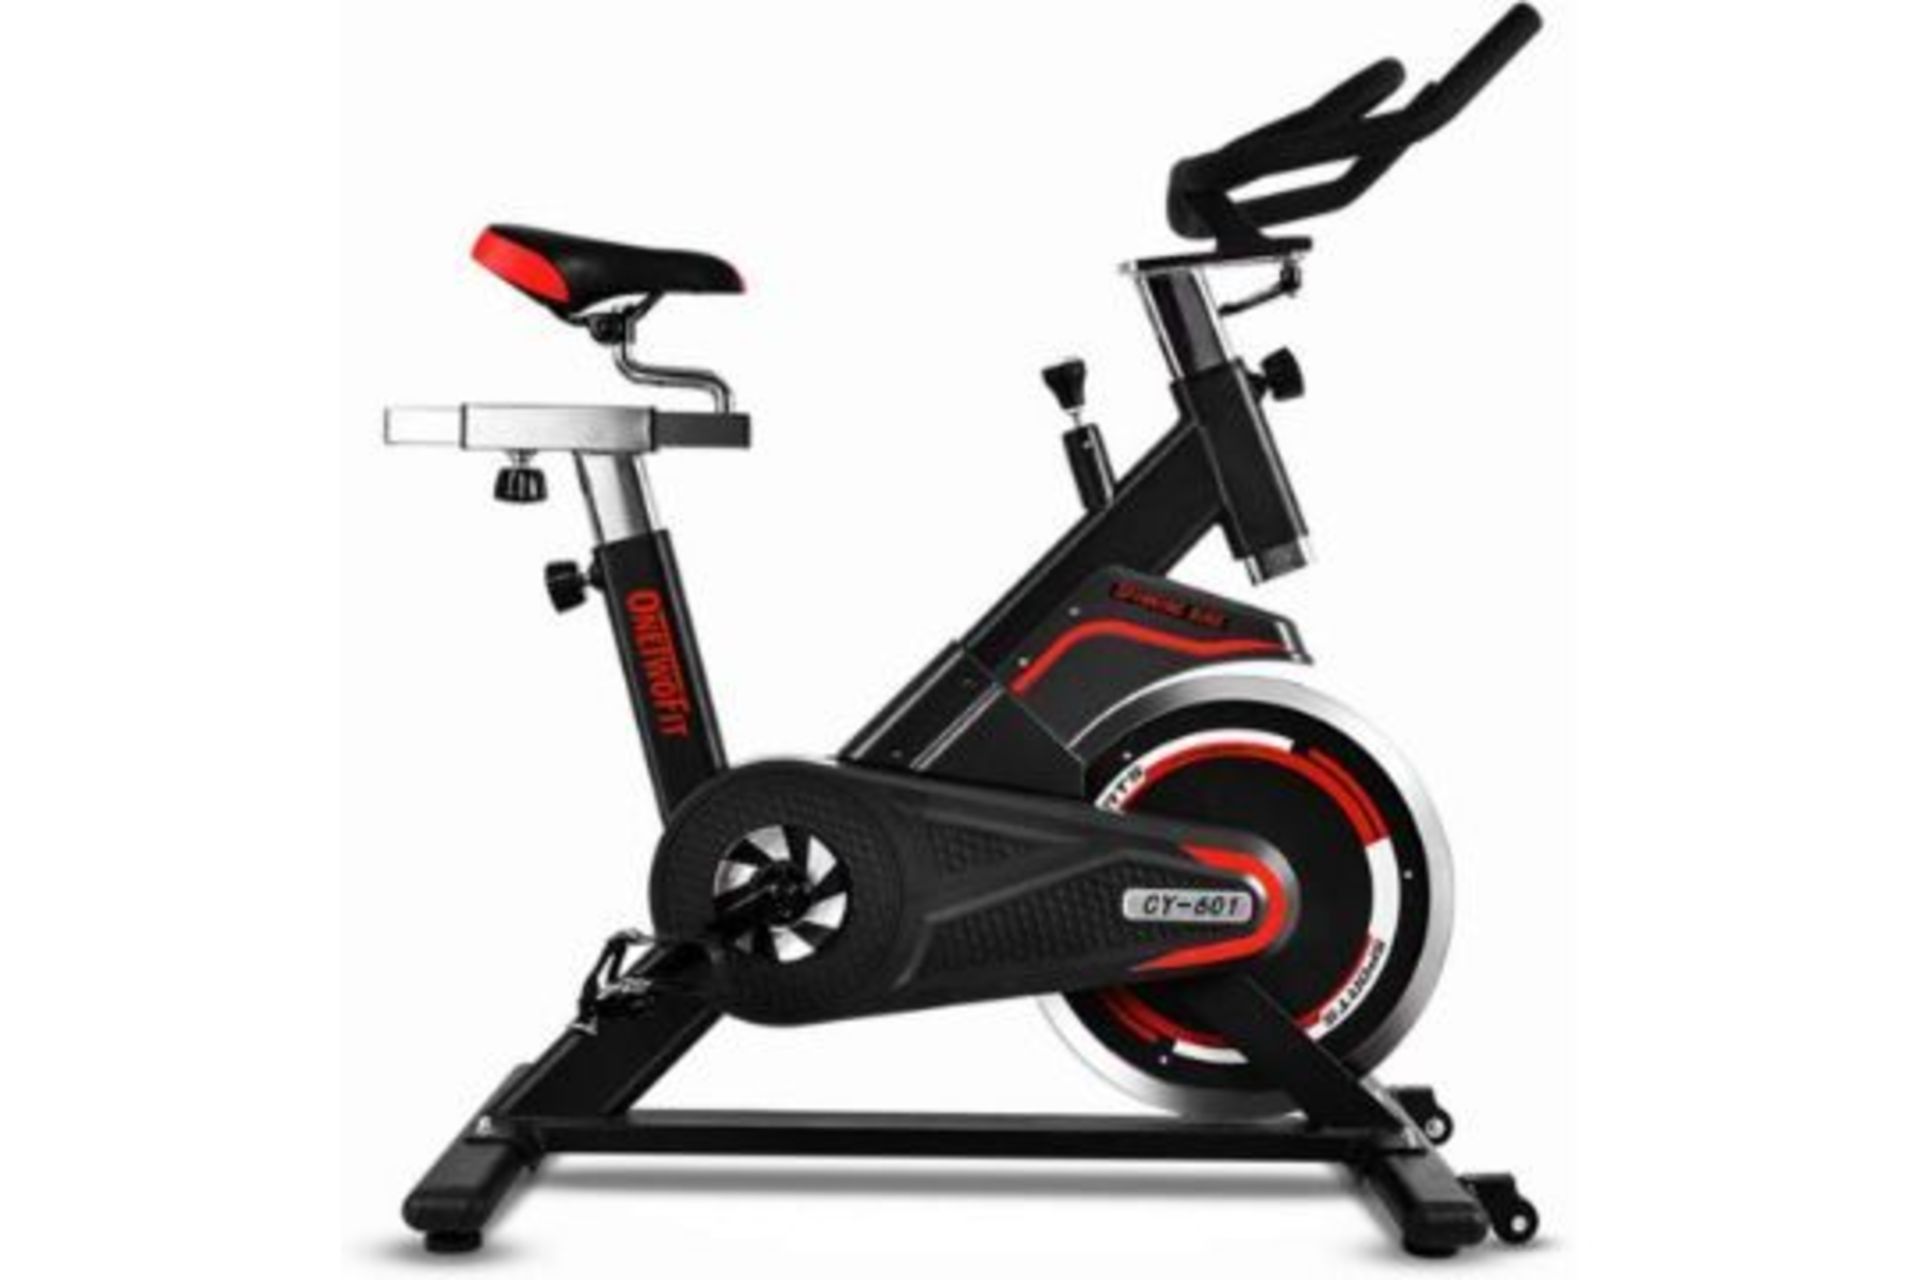 PALLET TO CONTAIN 4 X BRAND NEW ONETWOFIT EXERCISE BIKE, INDOOR CYCLING BIKE WITH 44LBS FLYWHEEL,